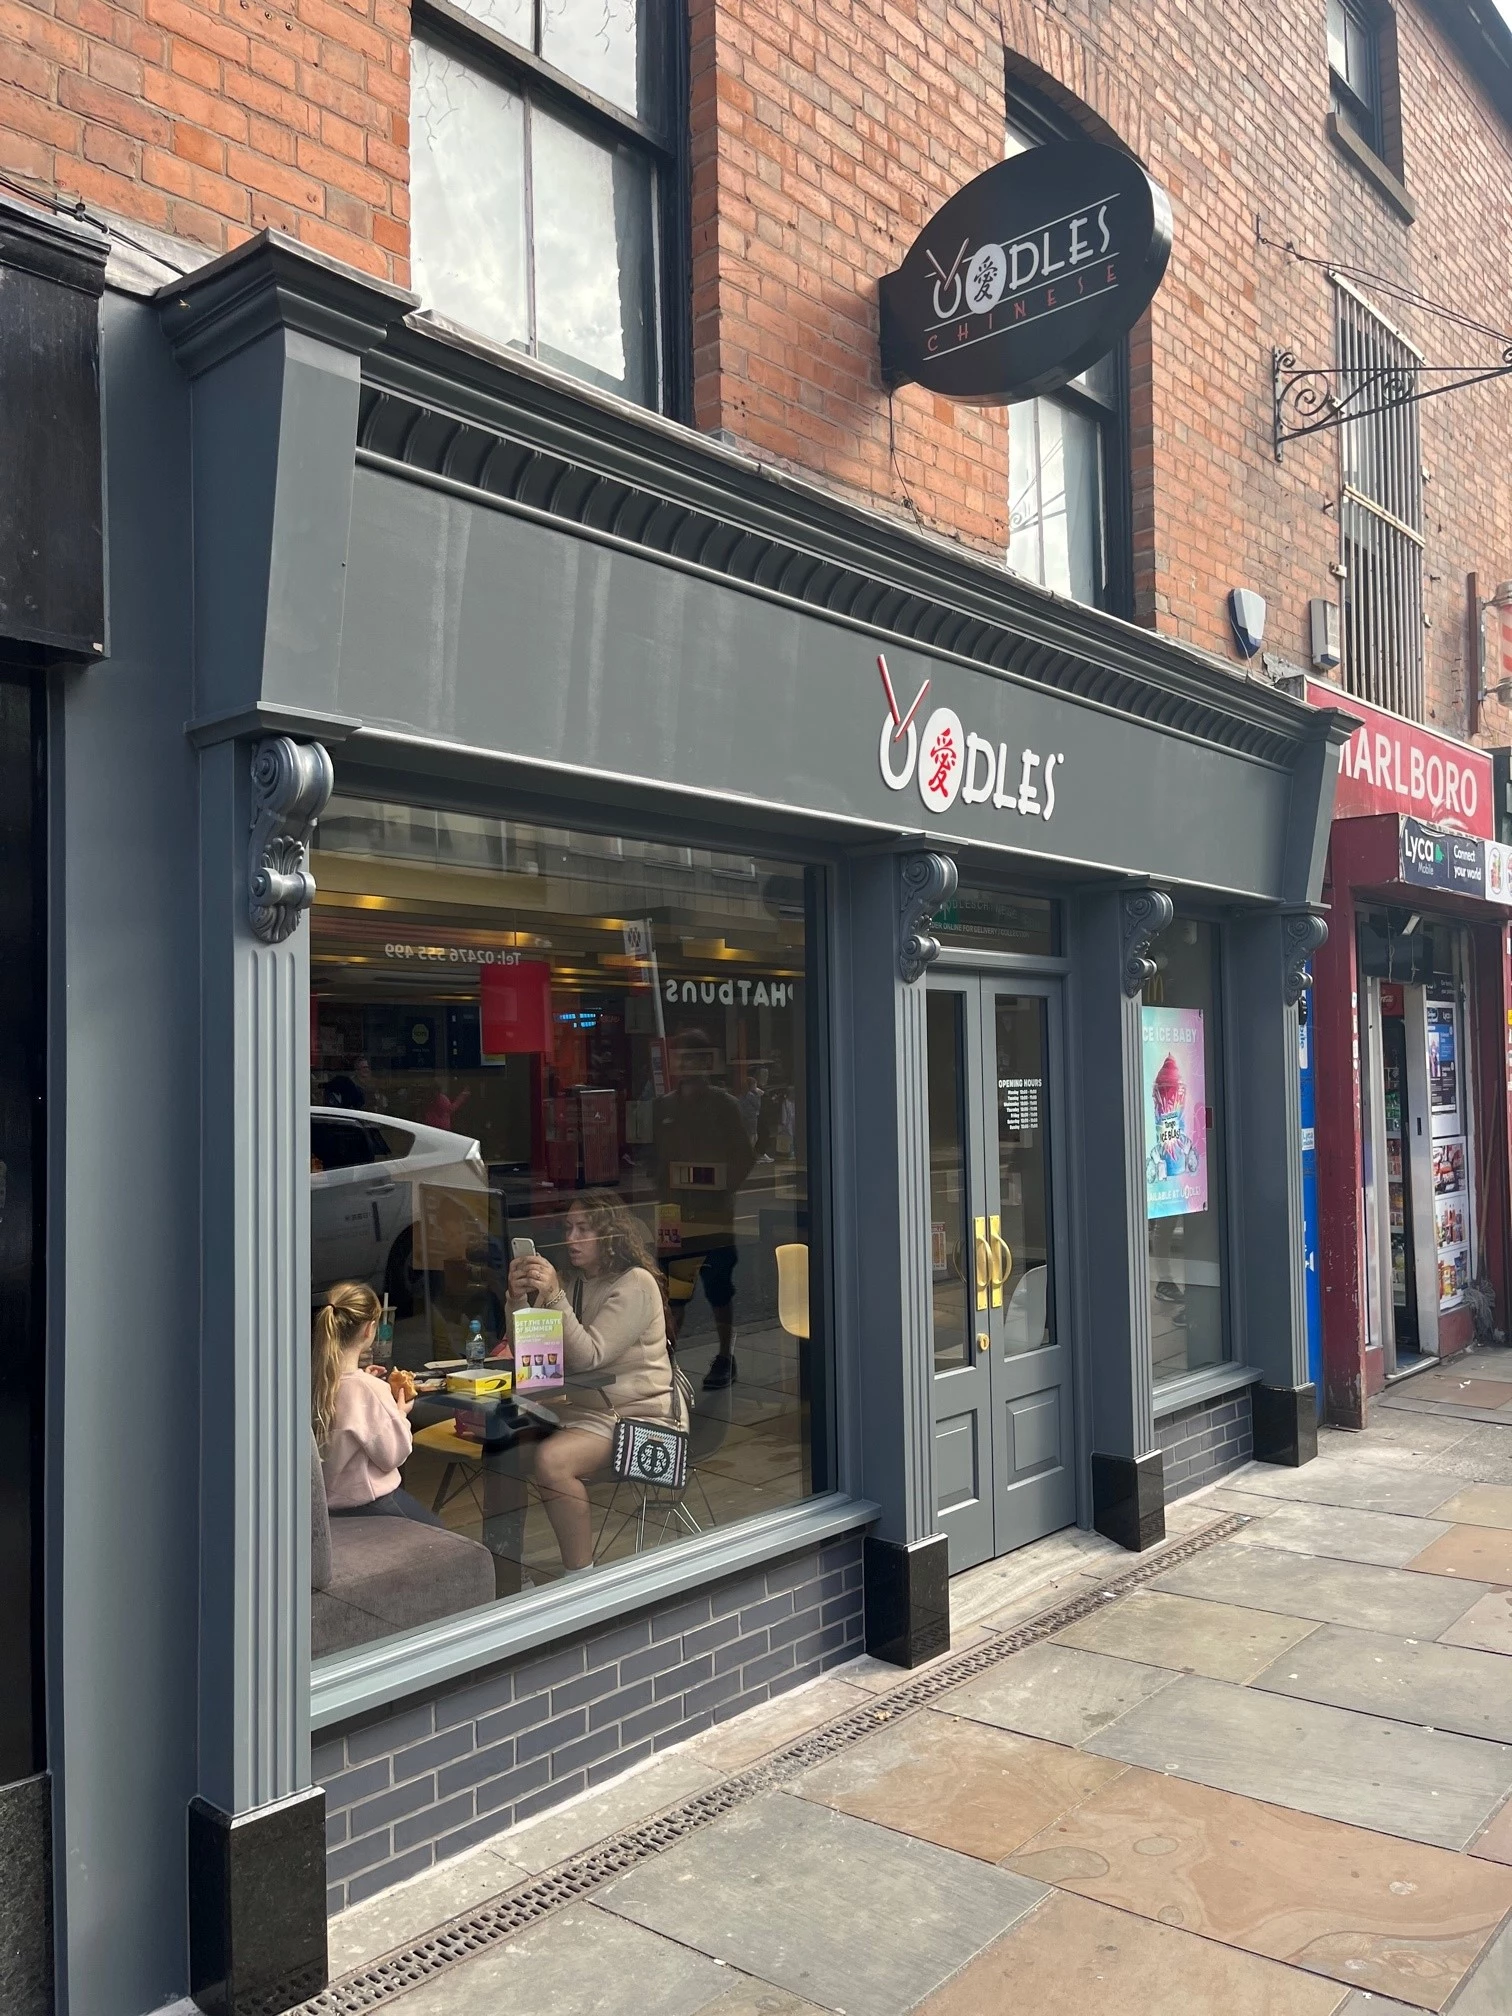 The new-look Oodles restaurant shop front in Coventry city centre